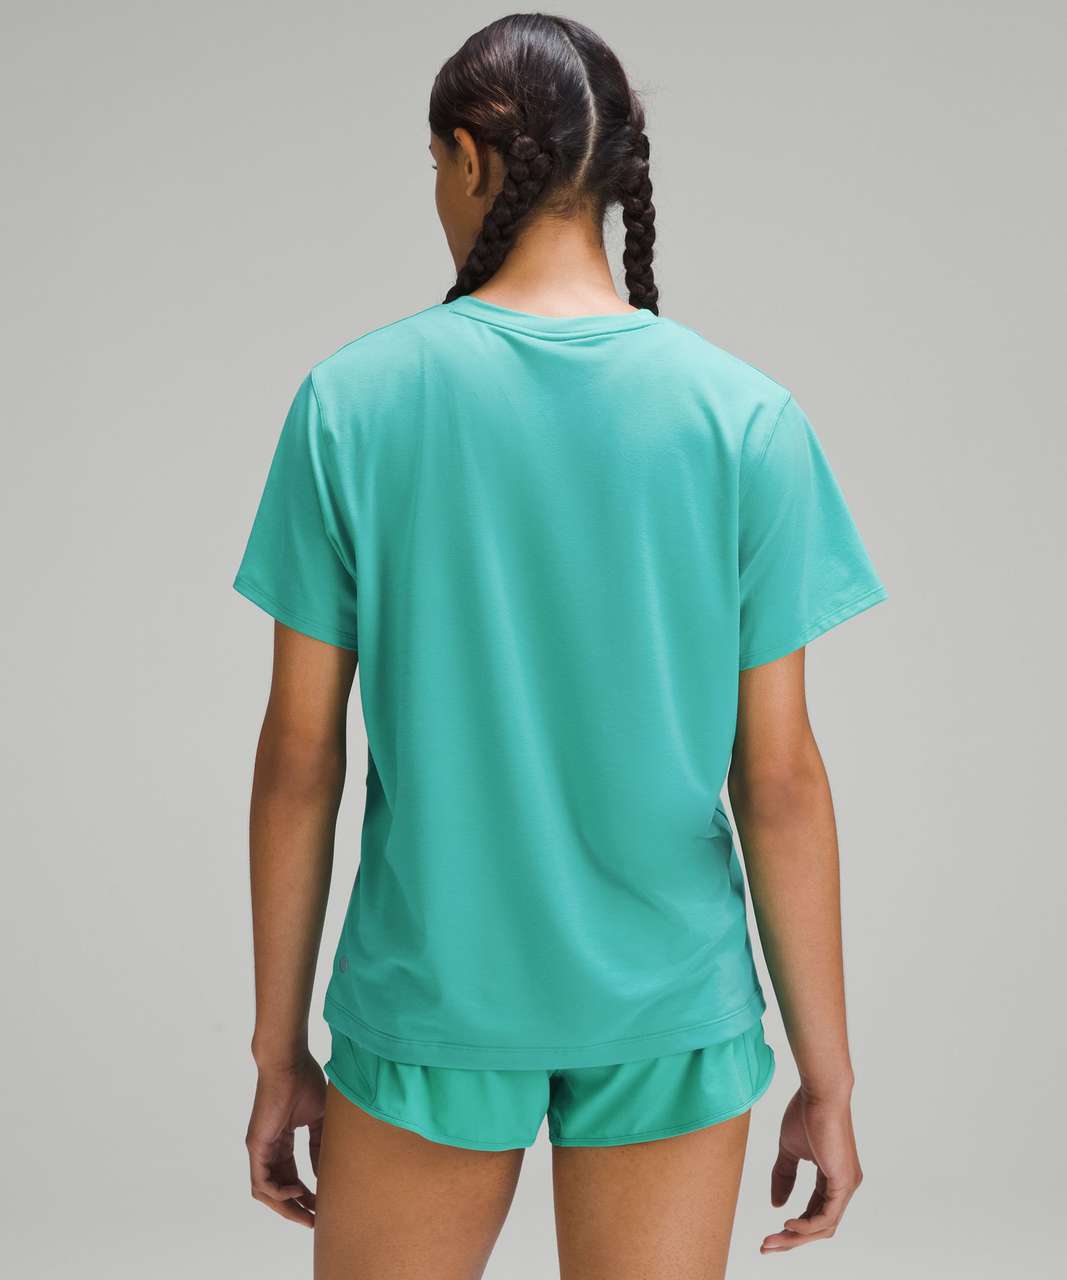 Lululemon Align T-Shirt Green Size 12 - $30 (55% Off Retail) New With Tags  - From Callie